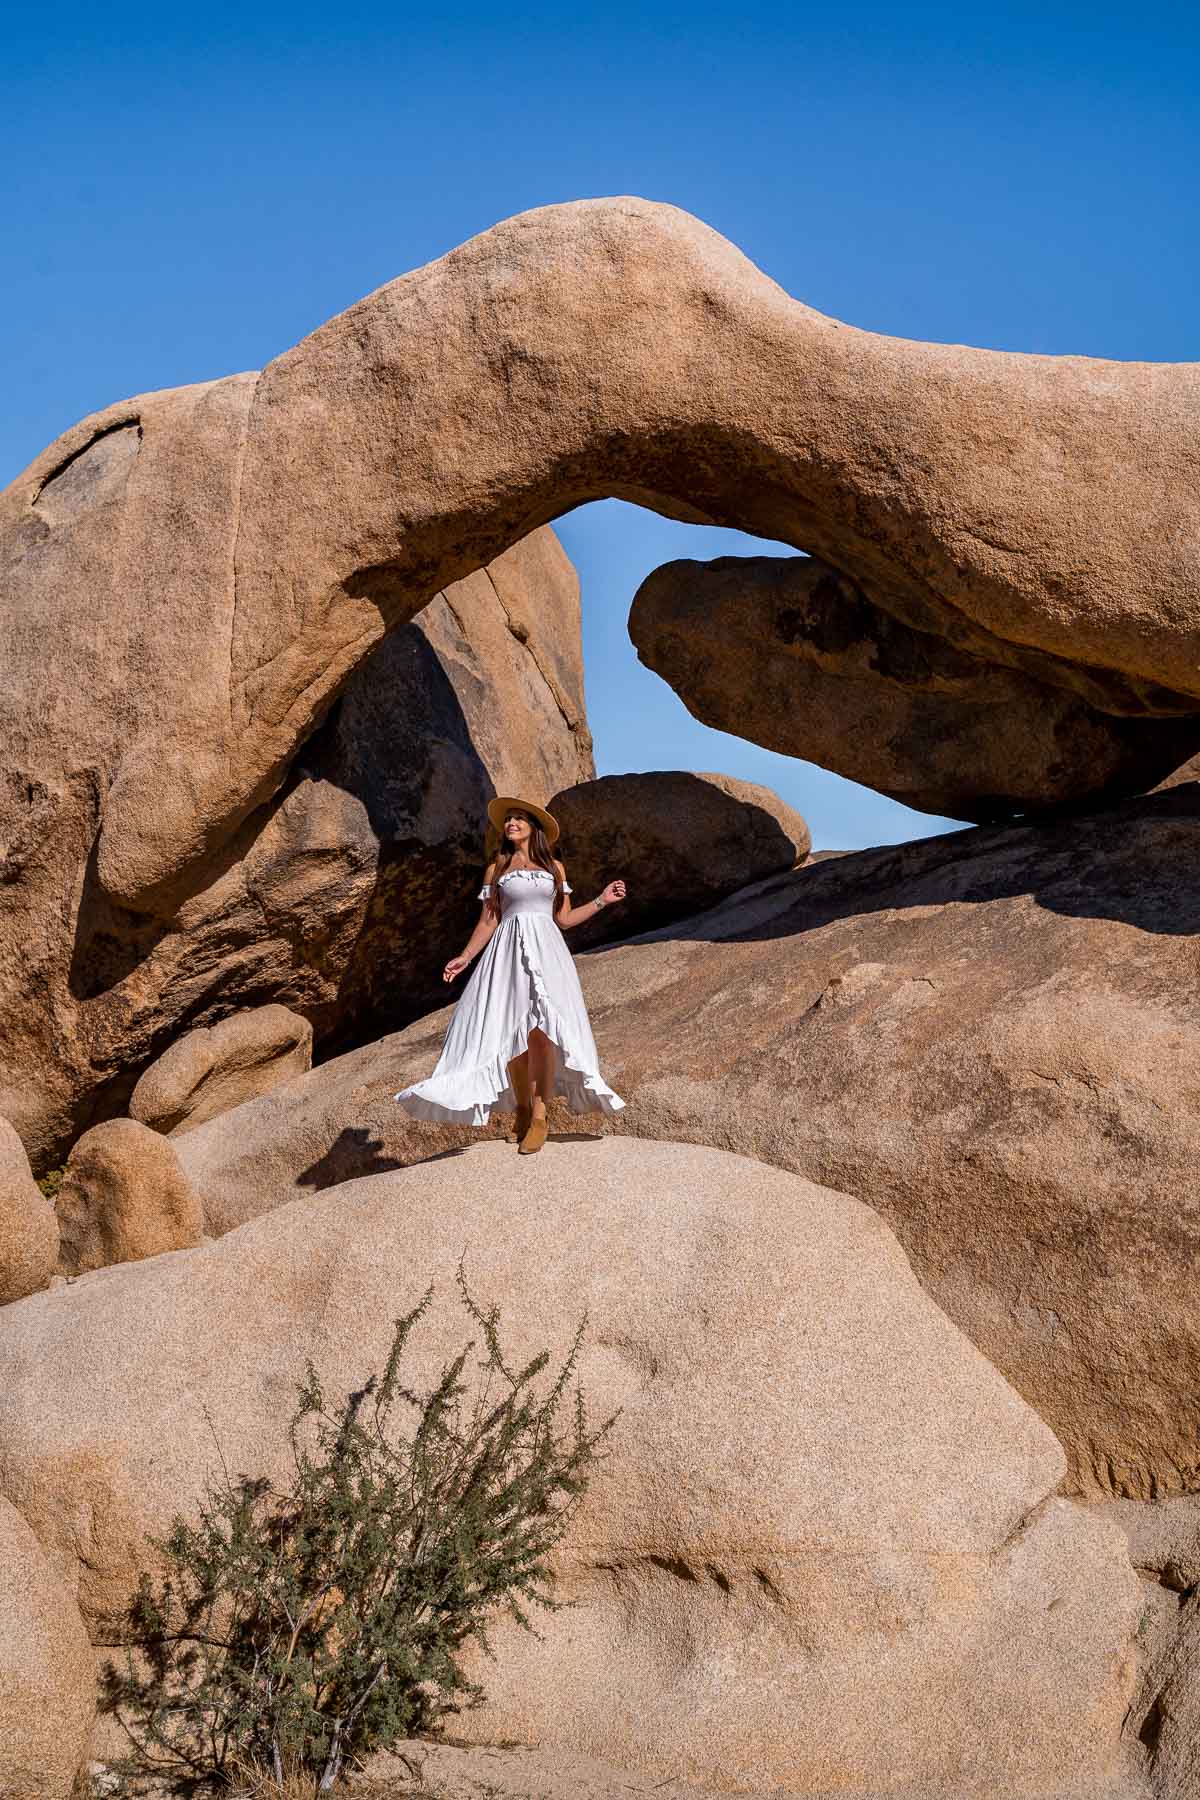 Girl in white dress at the Arch Rock in Joshua Tree National Park